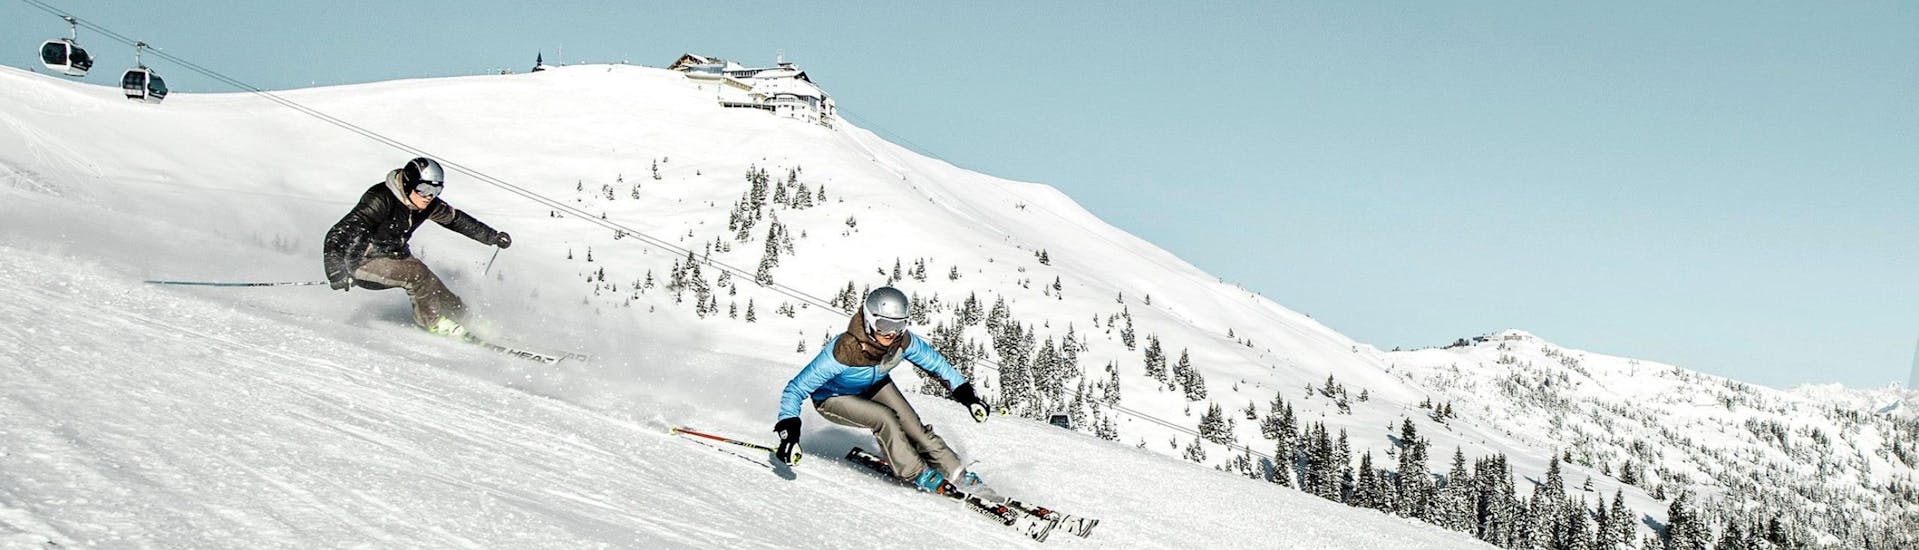 Two skiers are skiing down the ski slopes of the Schmittenhöhe mountain in Zell am See, a popular Austrian ski resort where local ski schools offer ski lessons to all those who want to learn to ski.